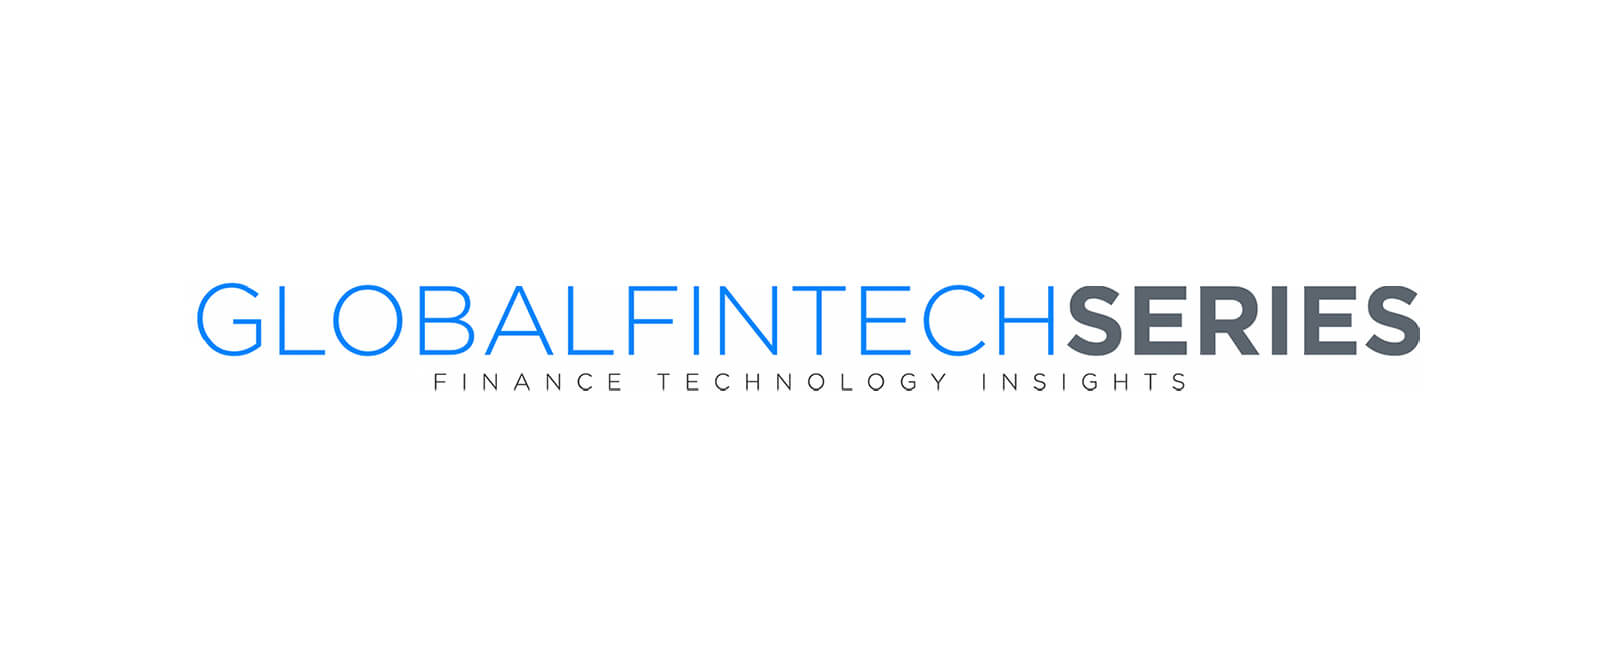 Chargebacks911 Calls for Regulatory Discretion as Fintech Industry Expands